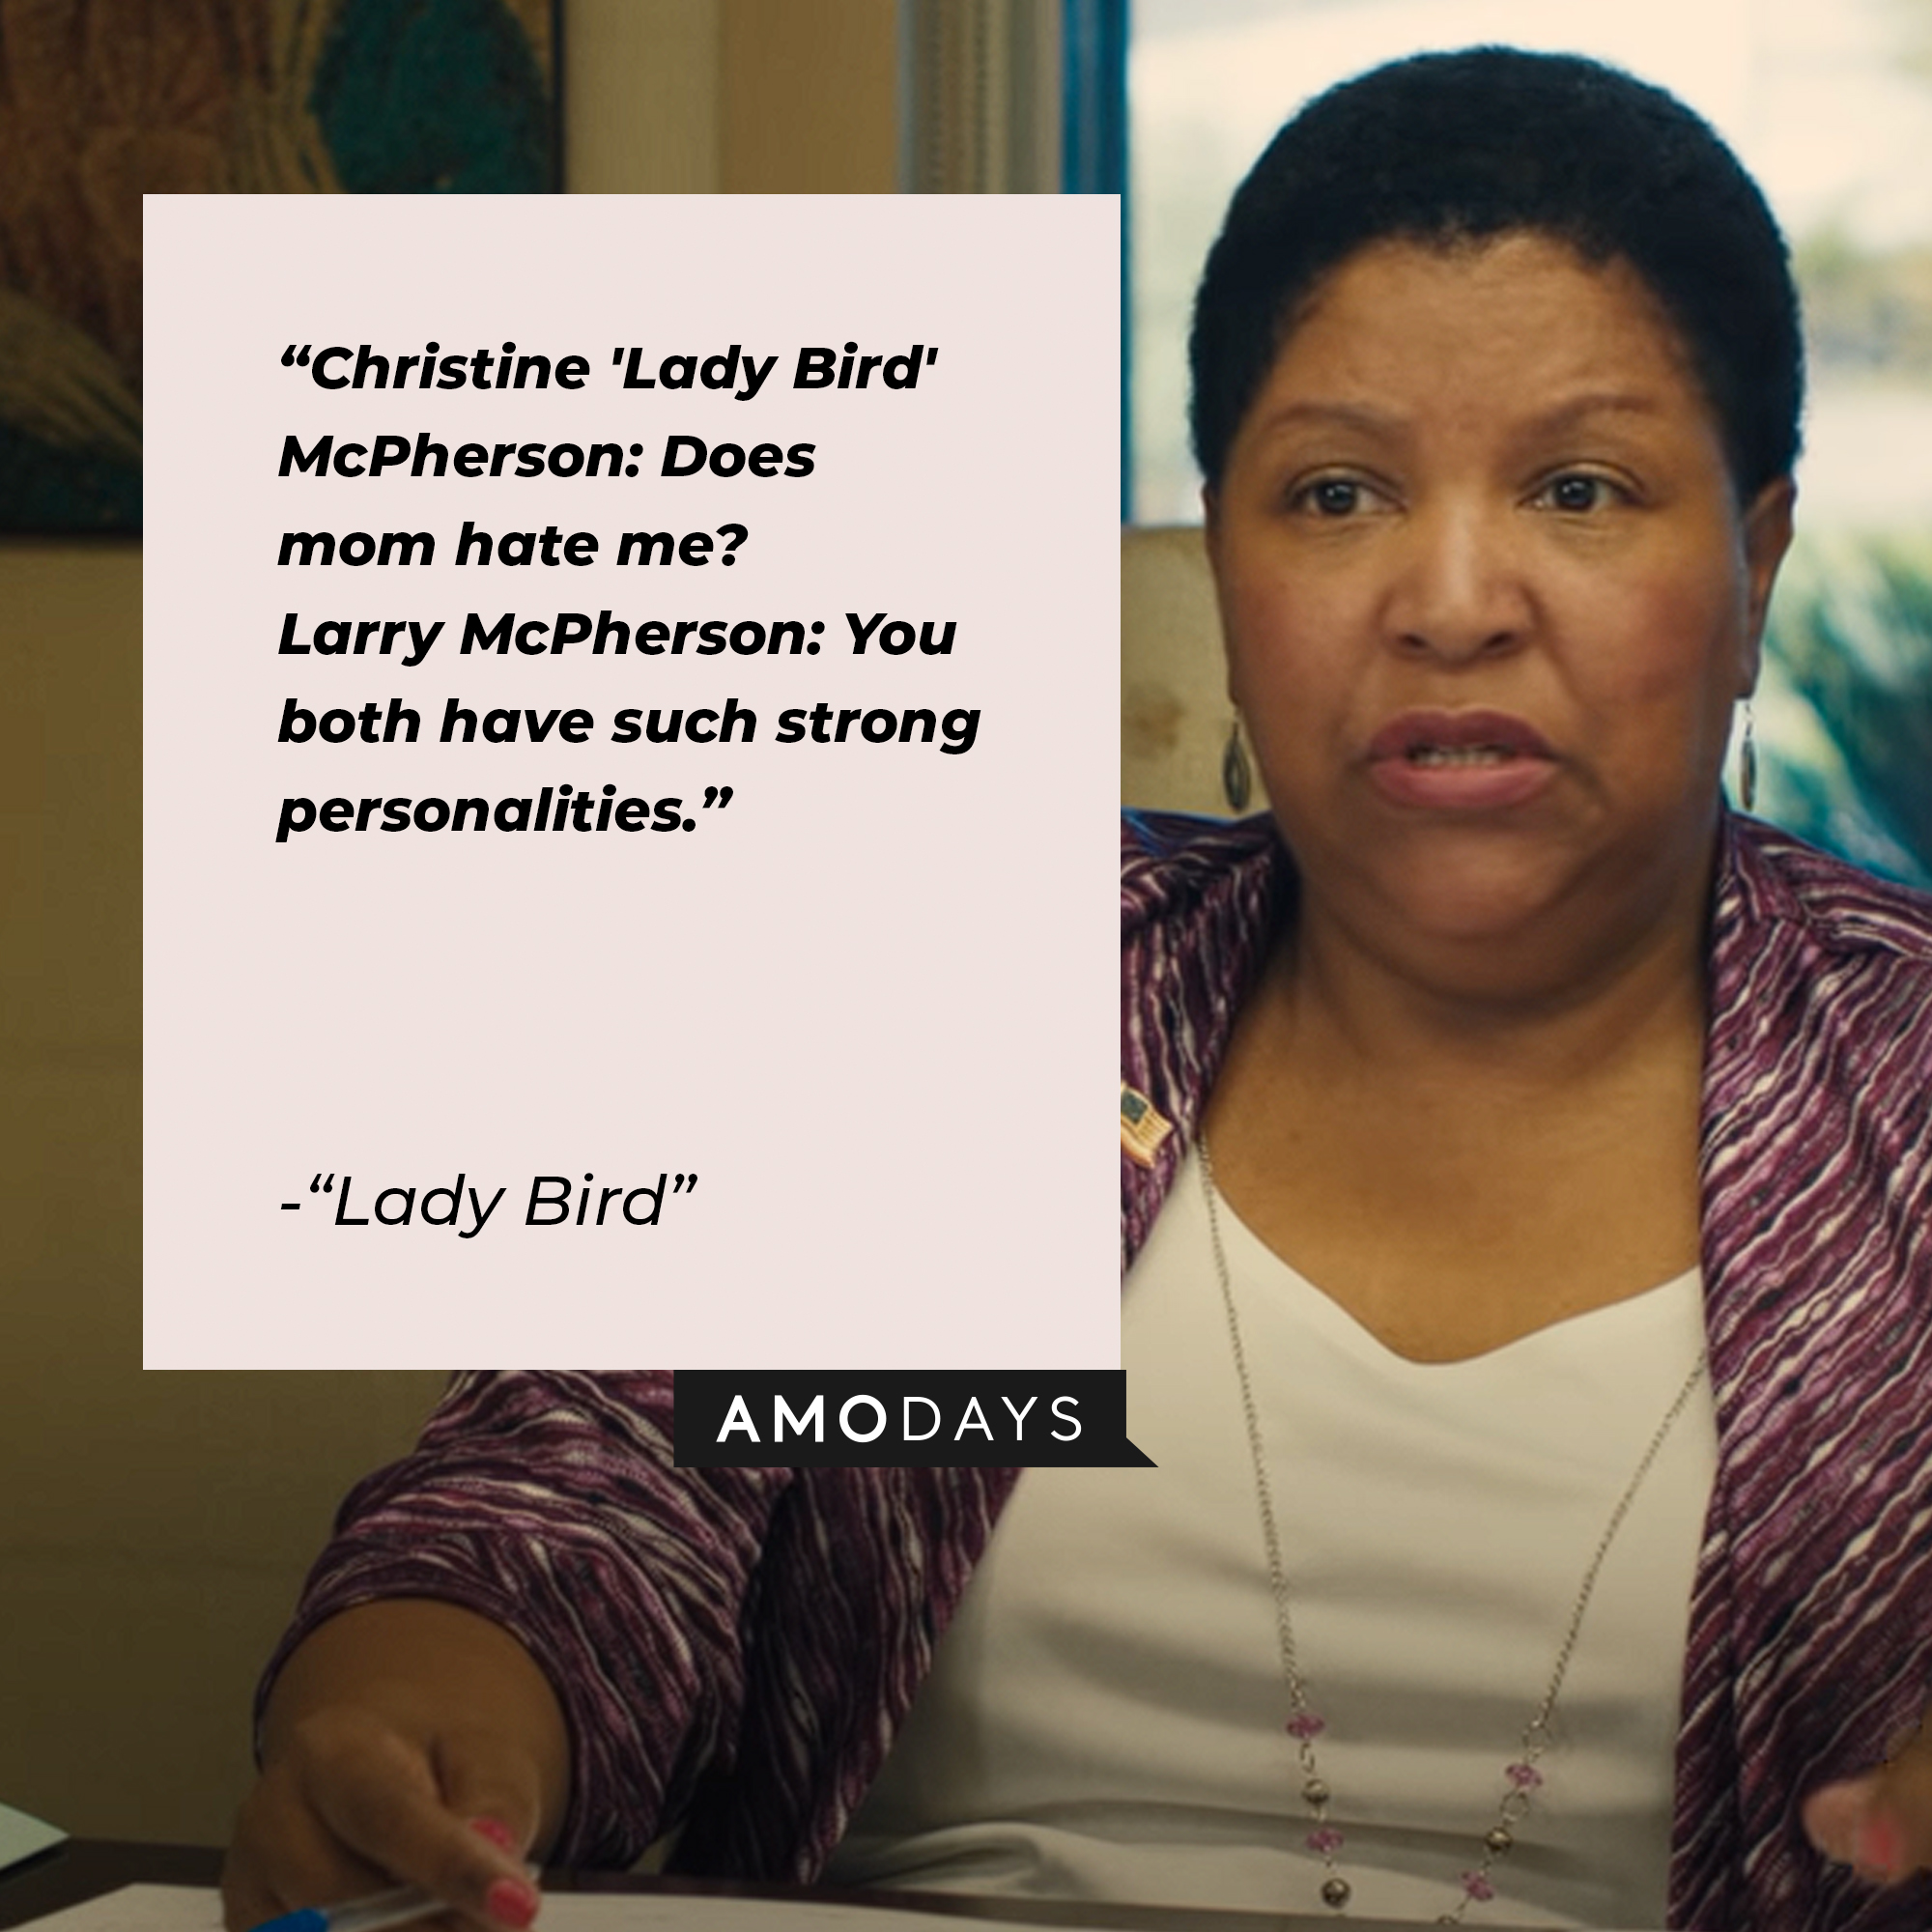 A dialogue from the "Lady Bird" film: "Christine 'Lady Bird' McPherson: Does mom hate me? Larry McPherson: You both have such strong personalities." | Source: youtube.com/A24